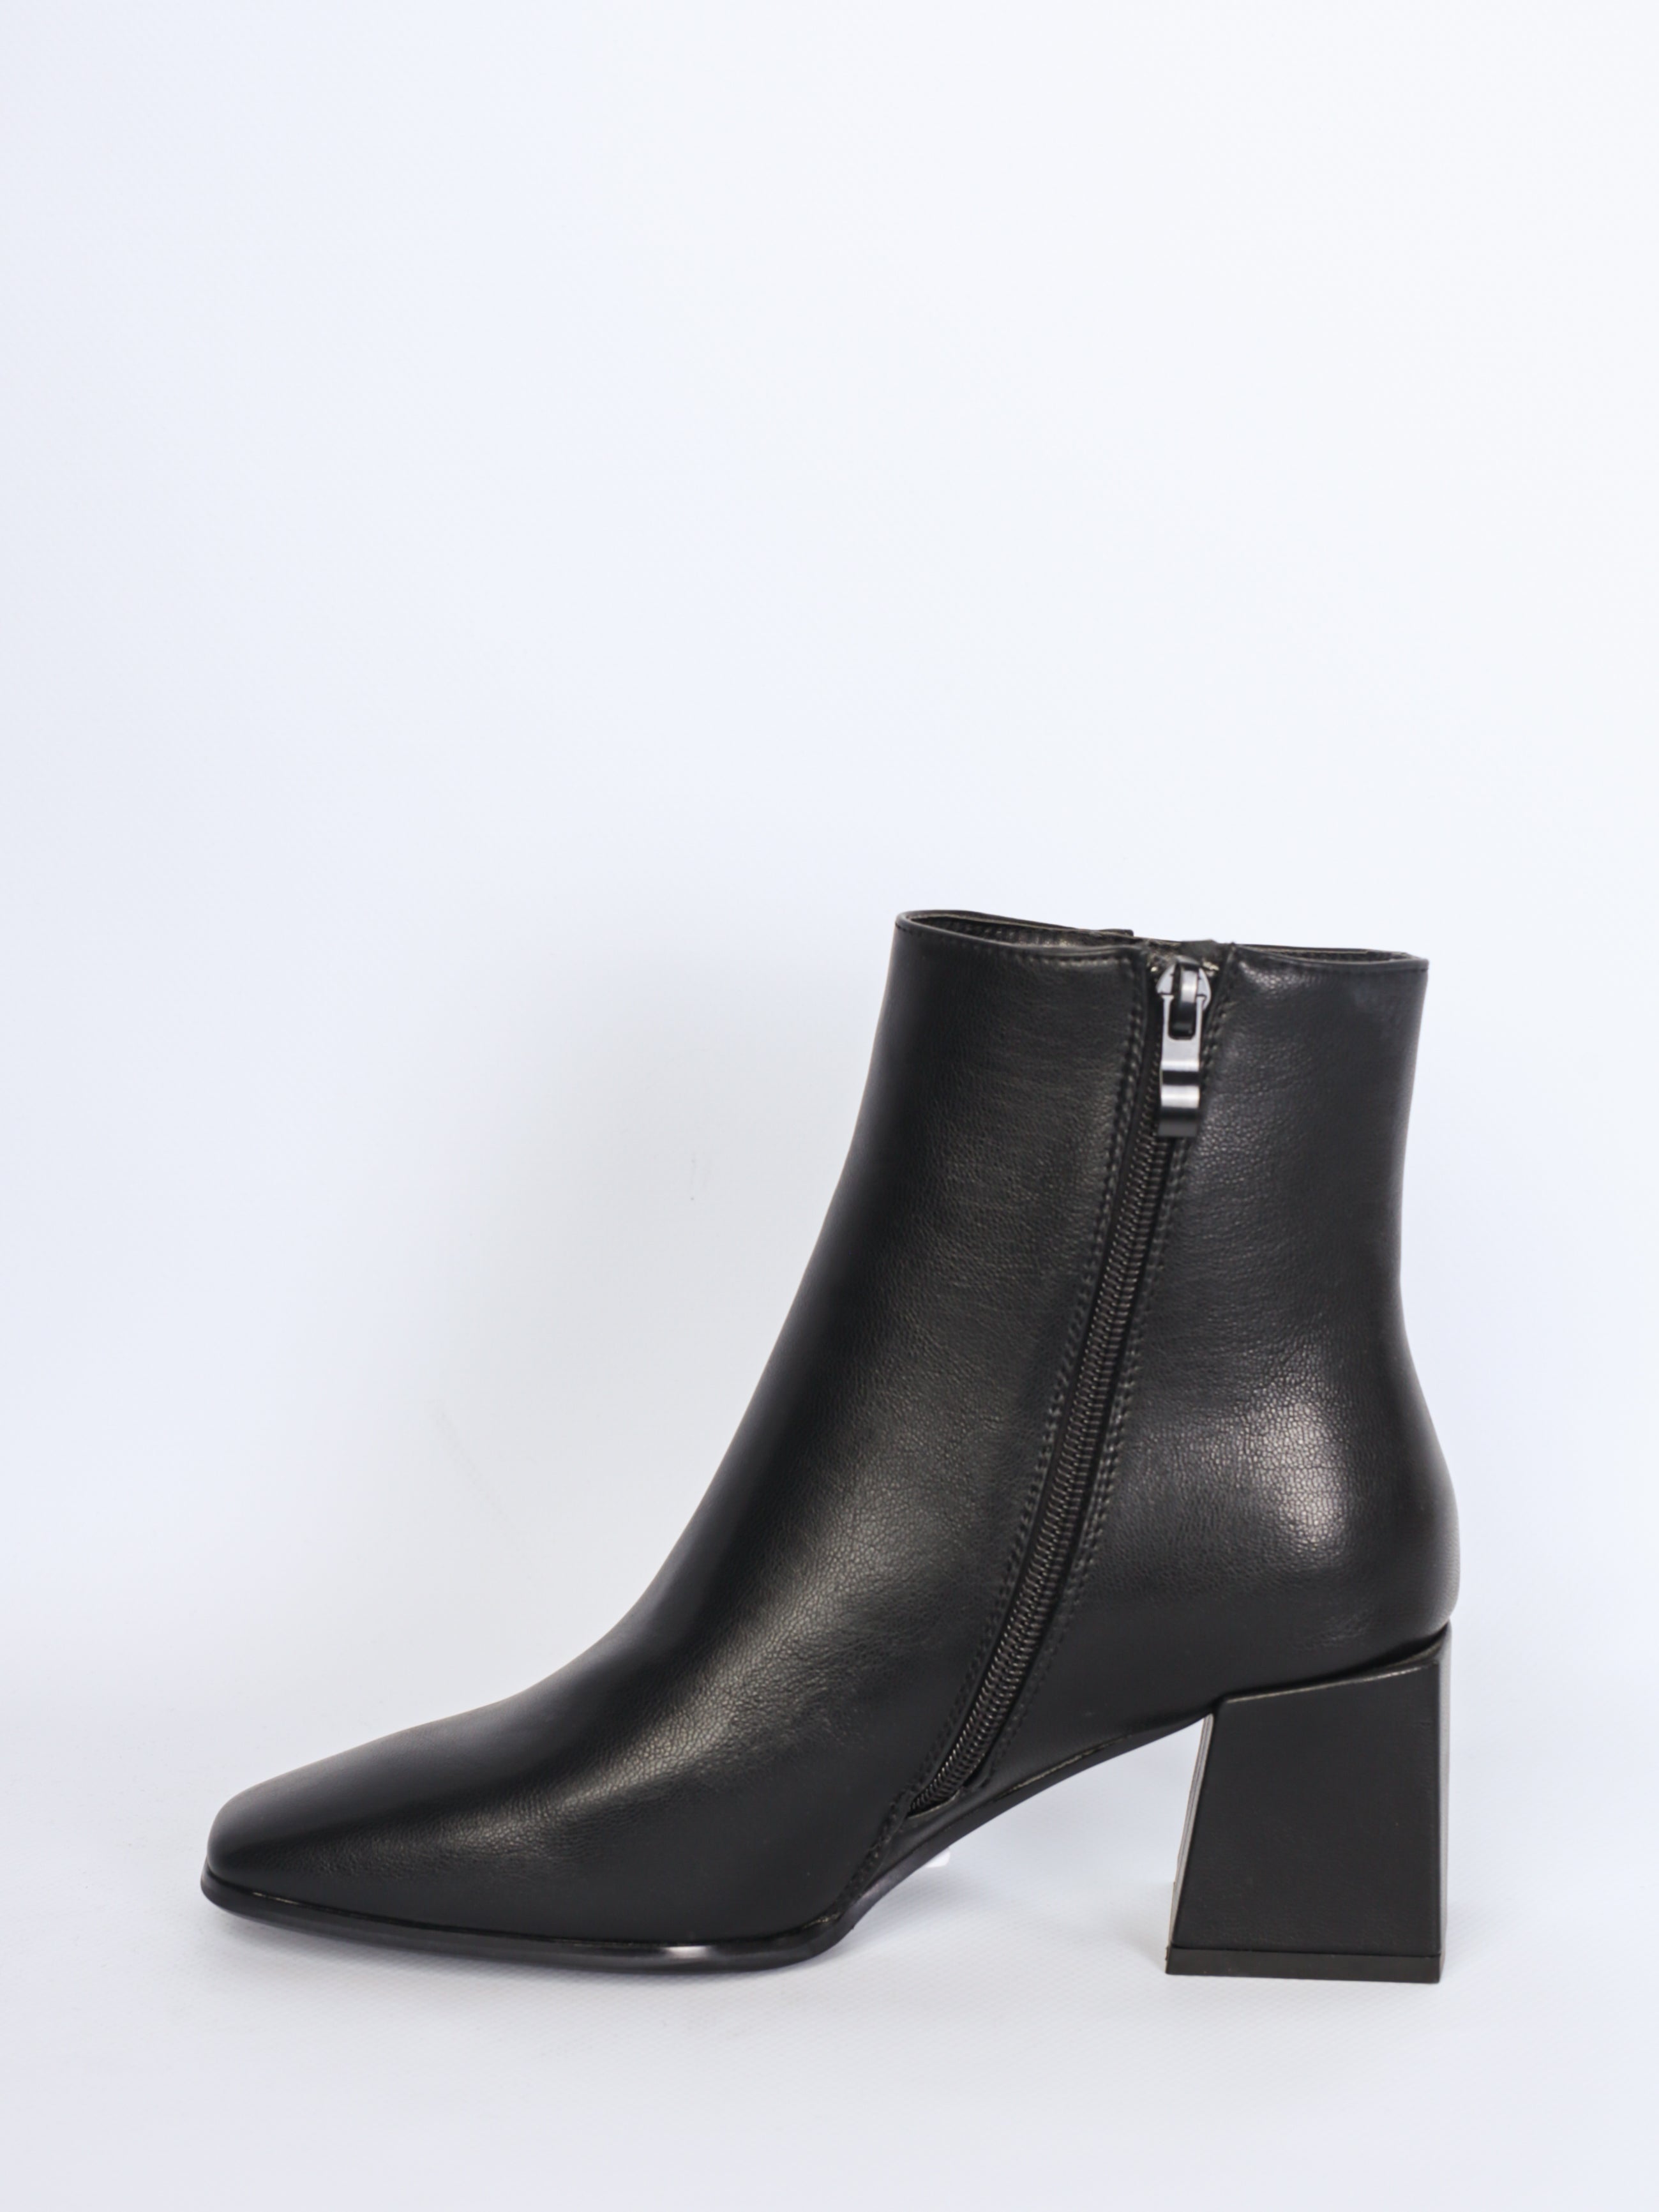 Imitation leather boots with a small heel